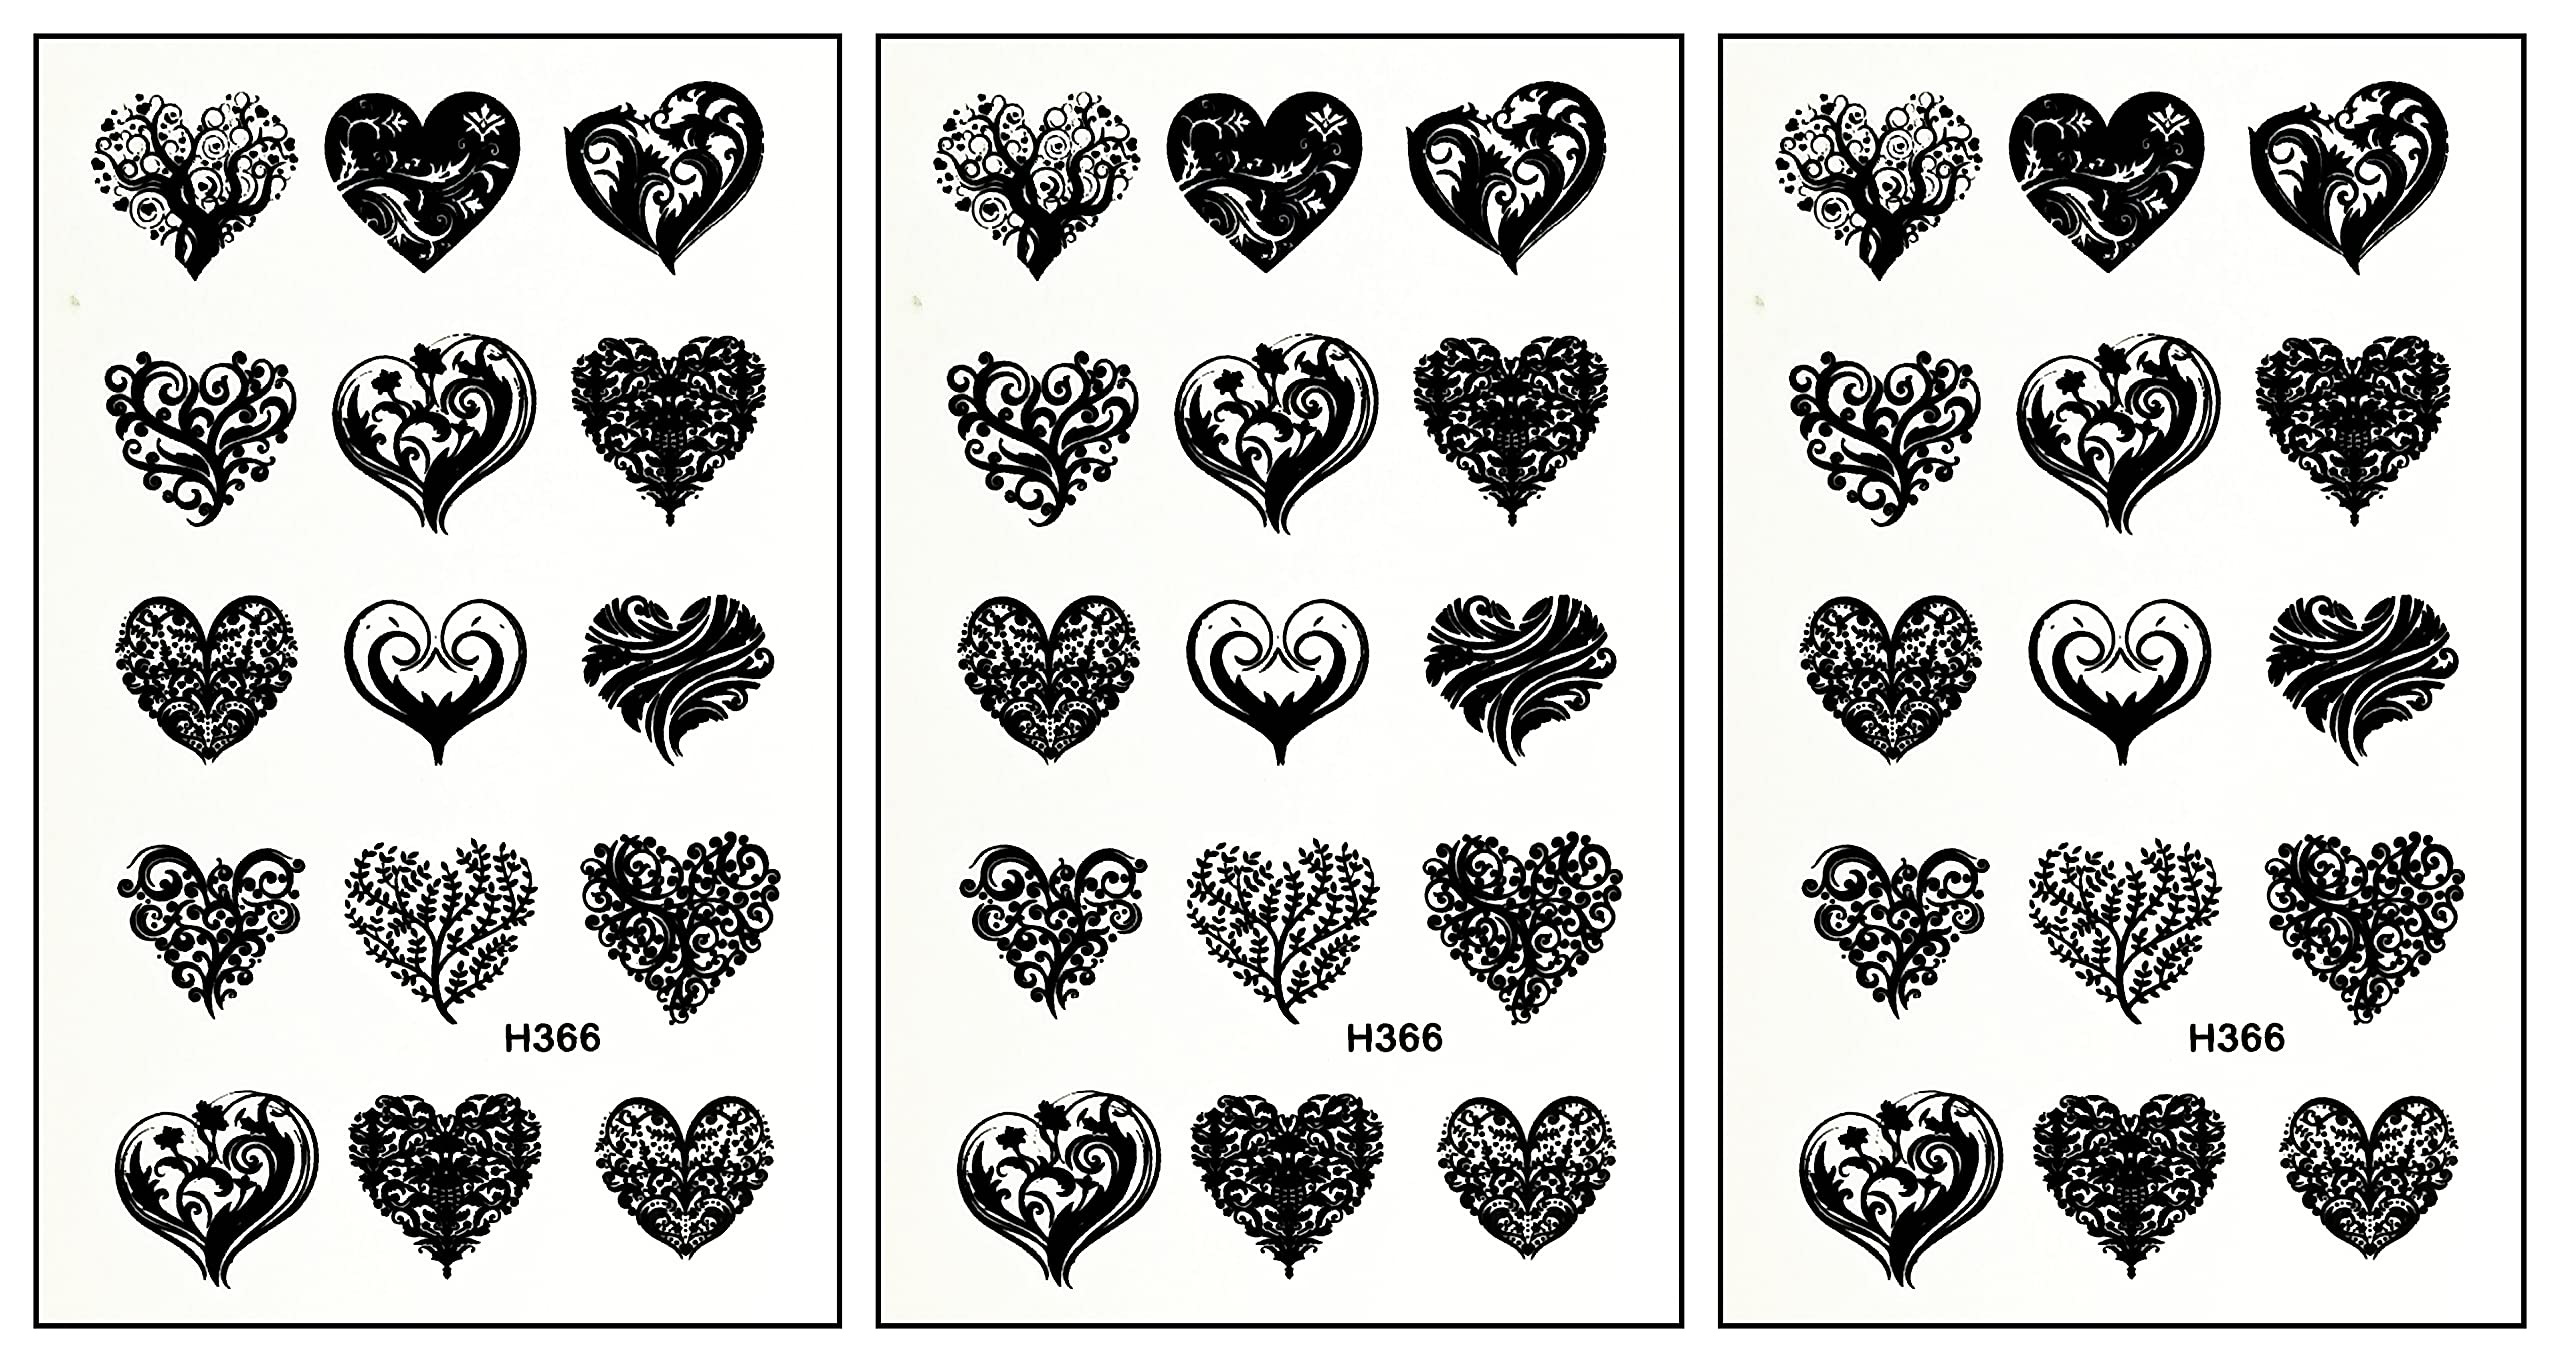 ONCEX Mini 3 Sheets Tattoos Heart Temporary Tattoos Stickers